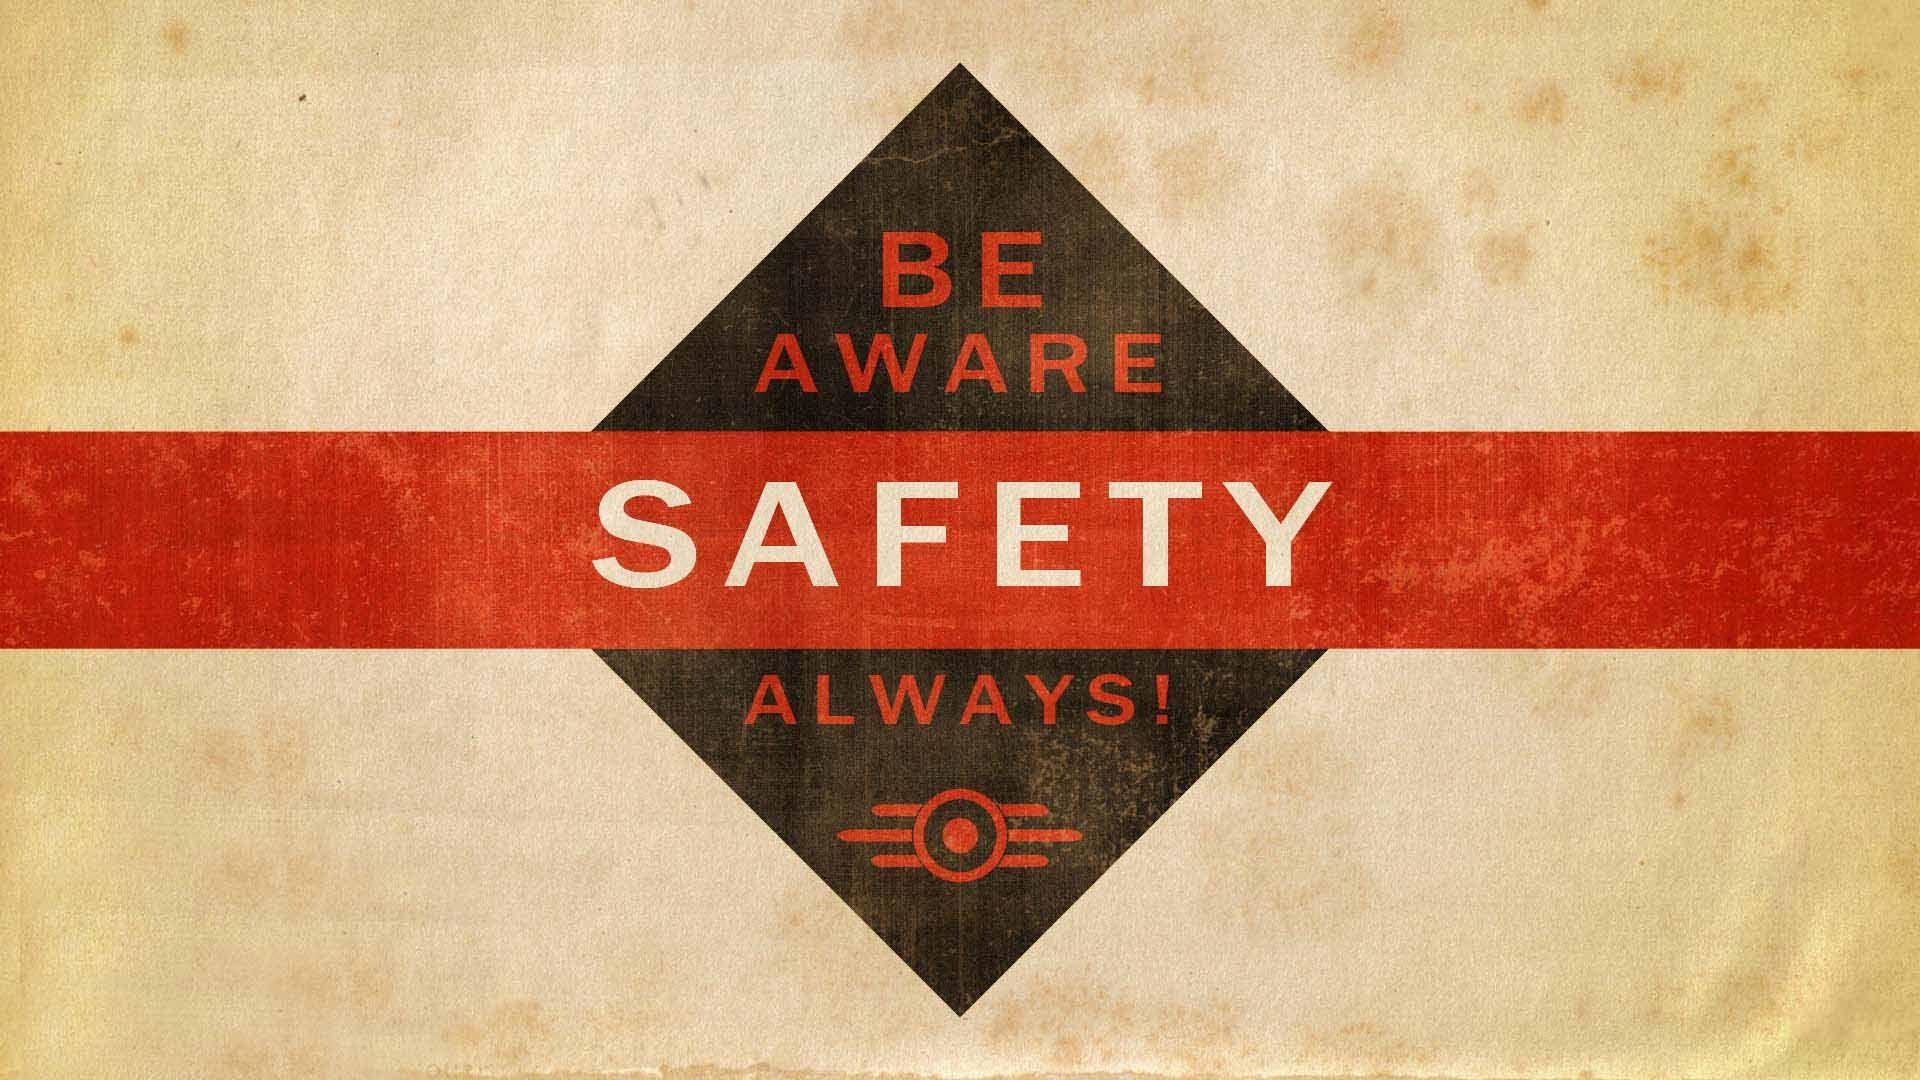 HD Wallpapers Safety  Wallpaper Cave